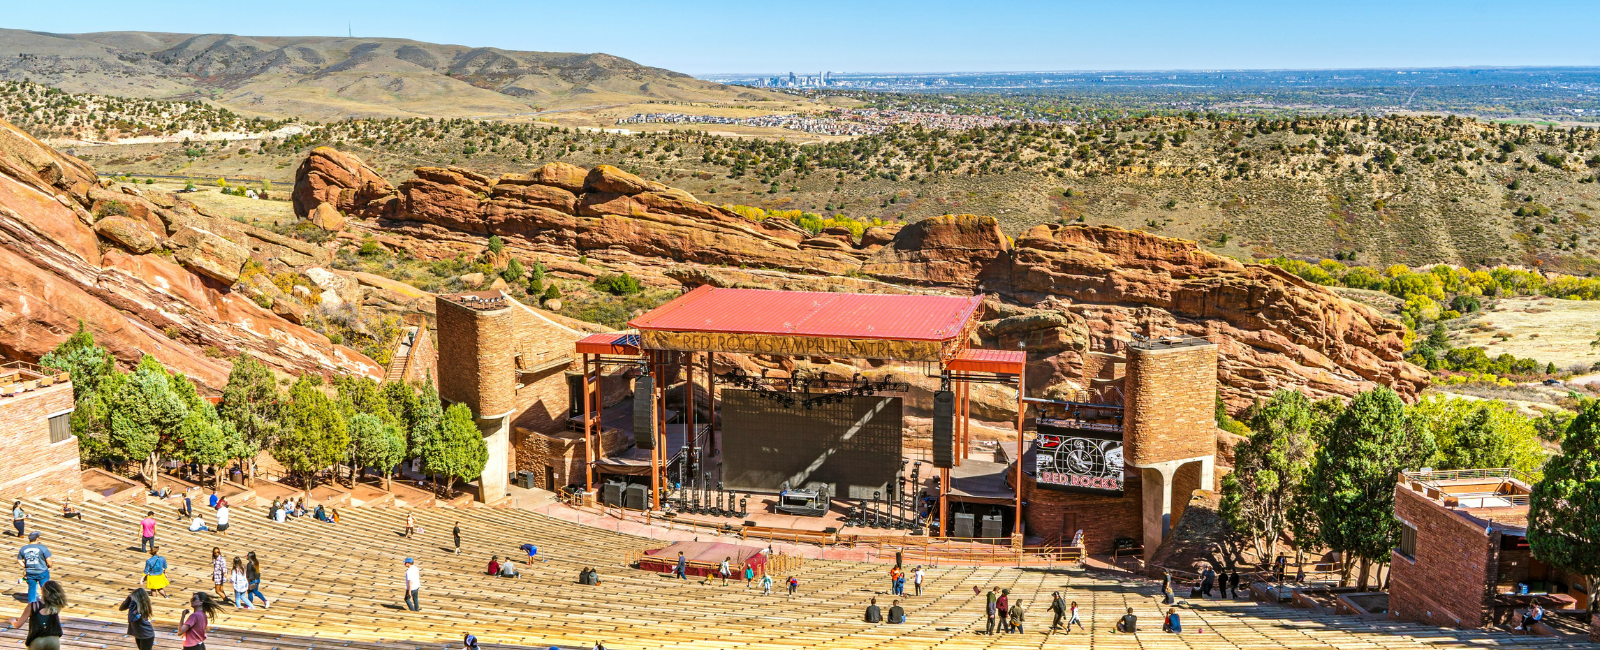 View from Red Rocks Park & Amphitheatre, Denver